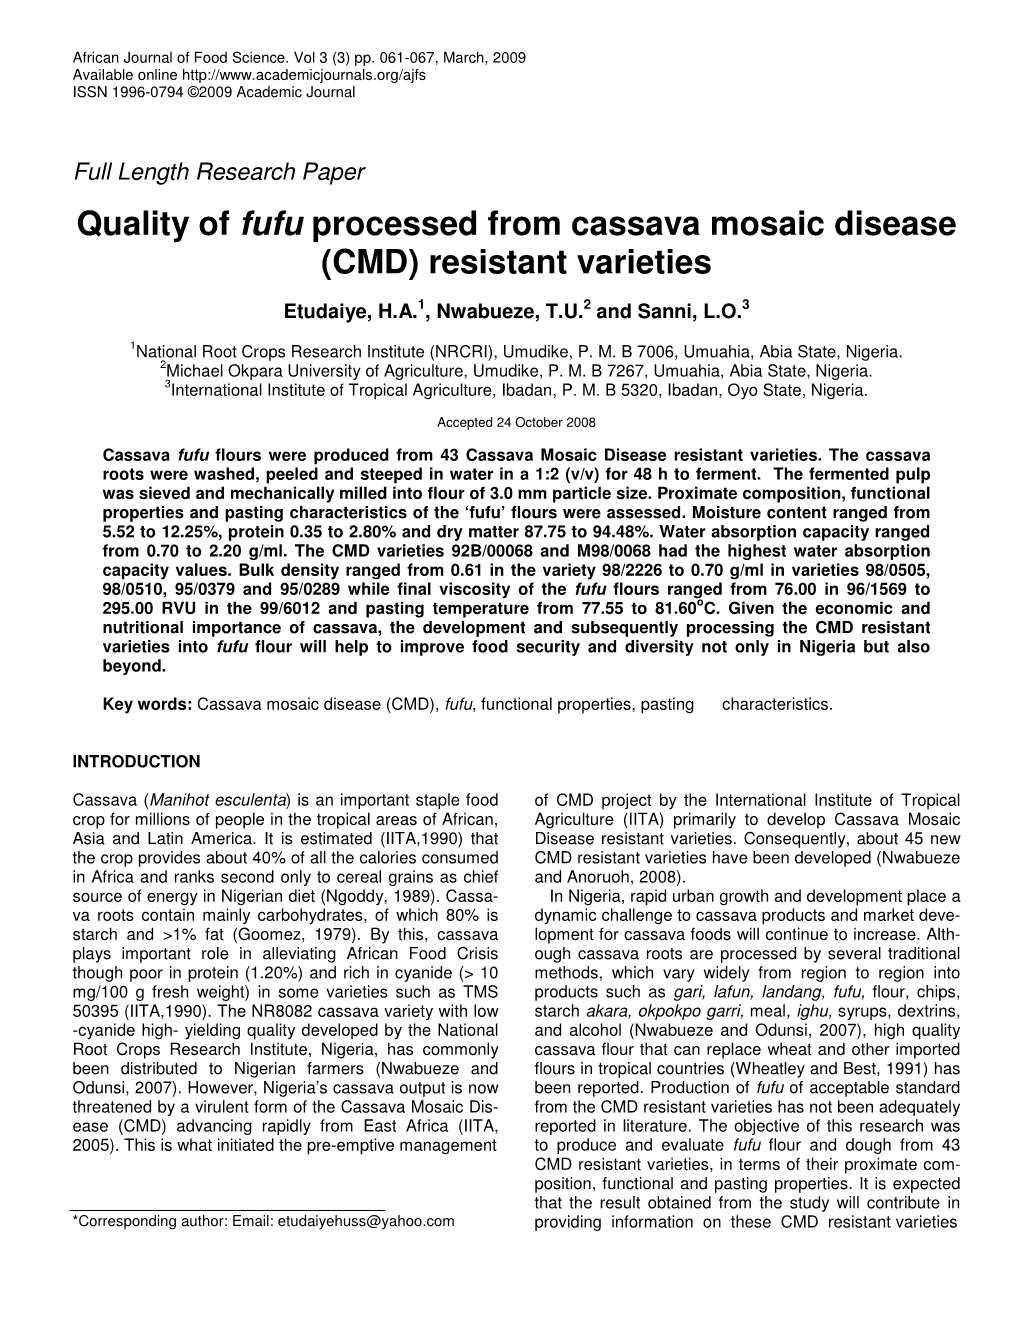 Quality of Fufu Processed from Cassava Mosaic Disease (CMD) Resistant Varieties